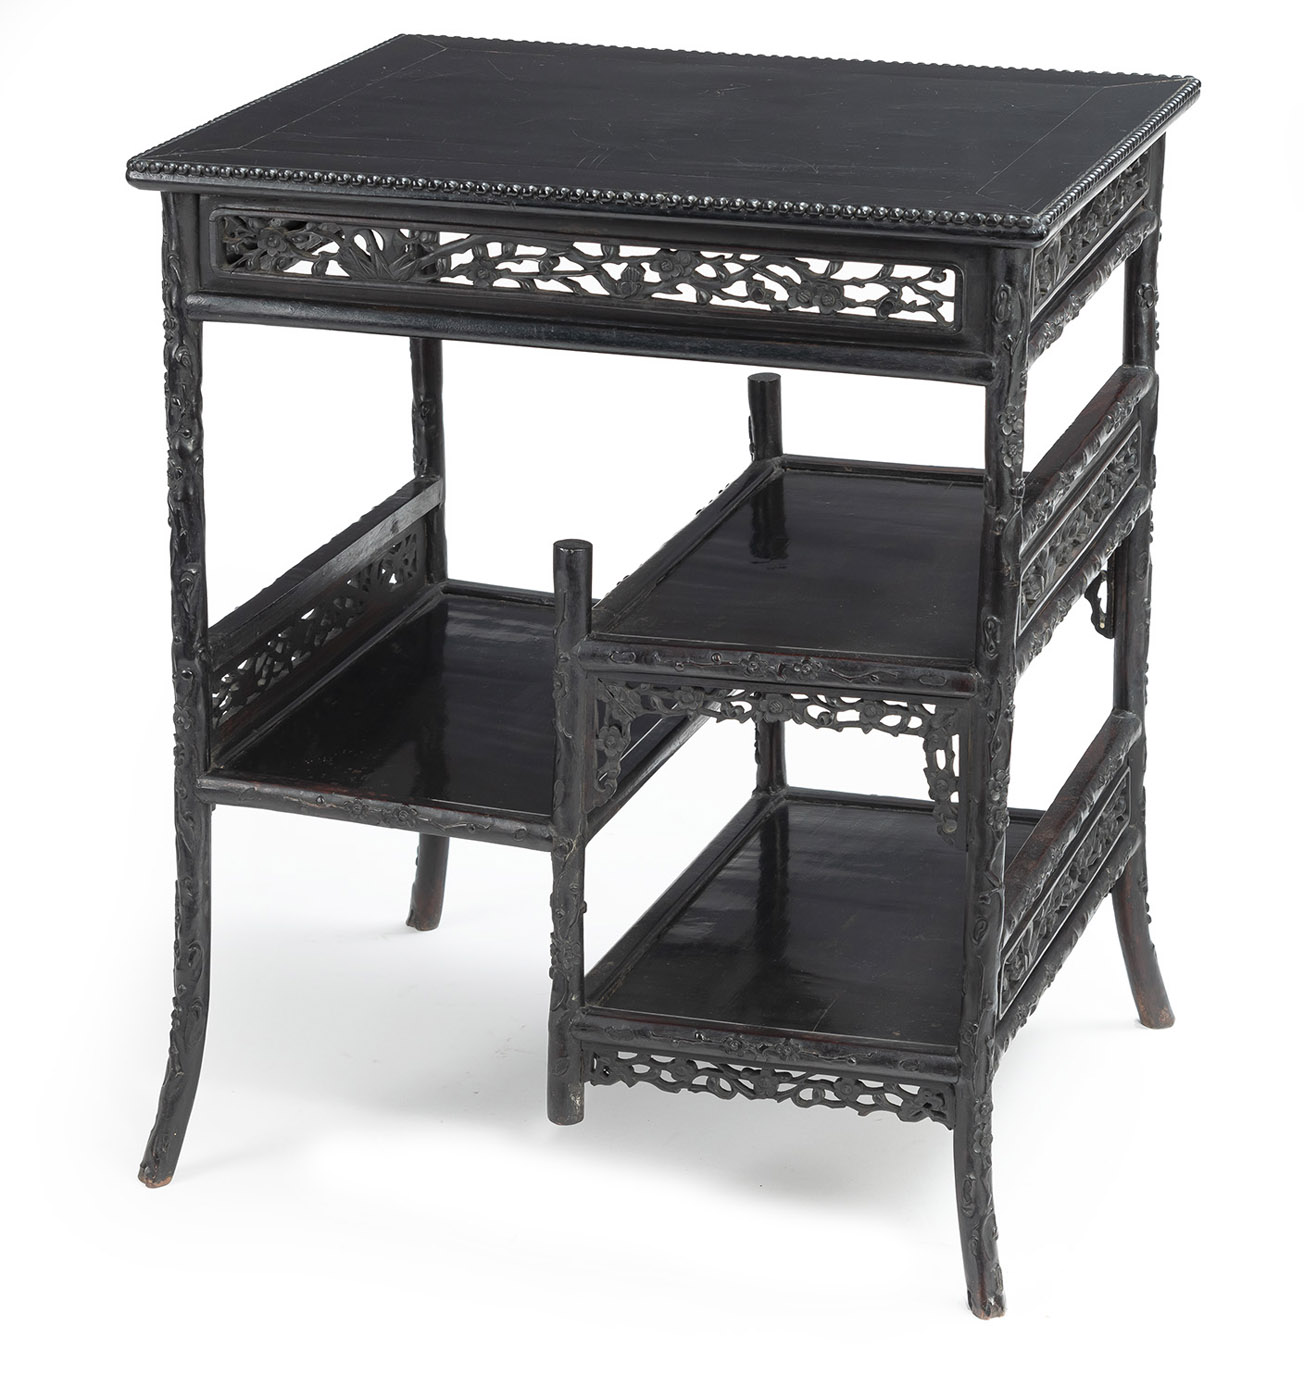 <b>A FOUR-TIERED OPENWORK APRON DISPLAY TABLE RACK</b>